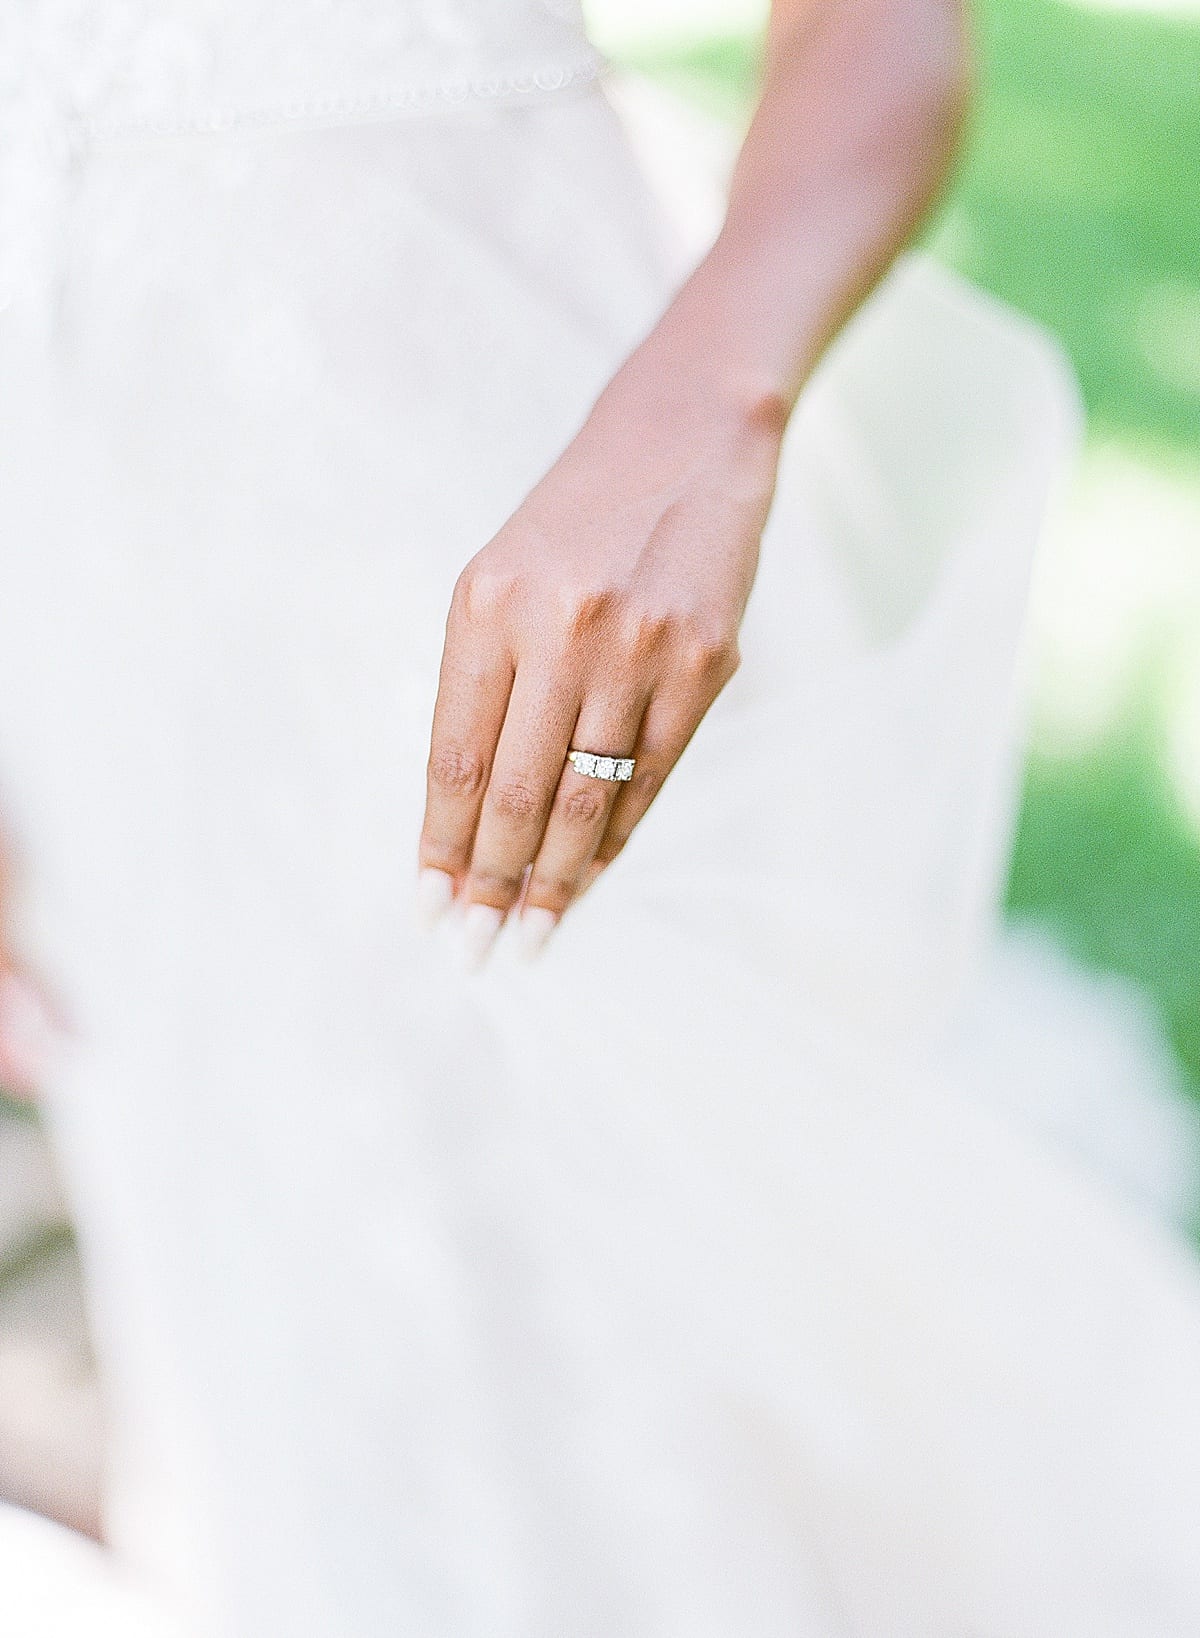 Wedding Ring Hand Holding Wedding Gown Photo 